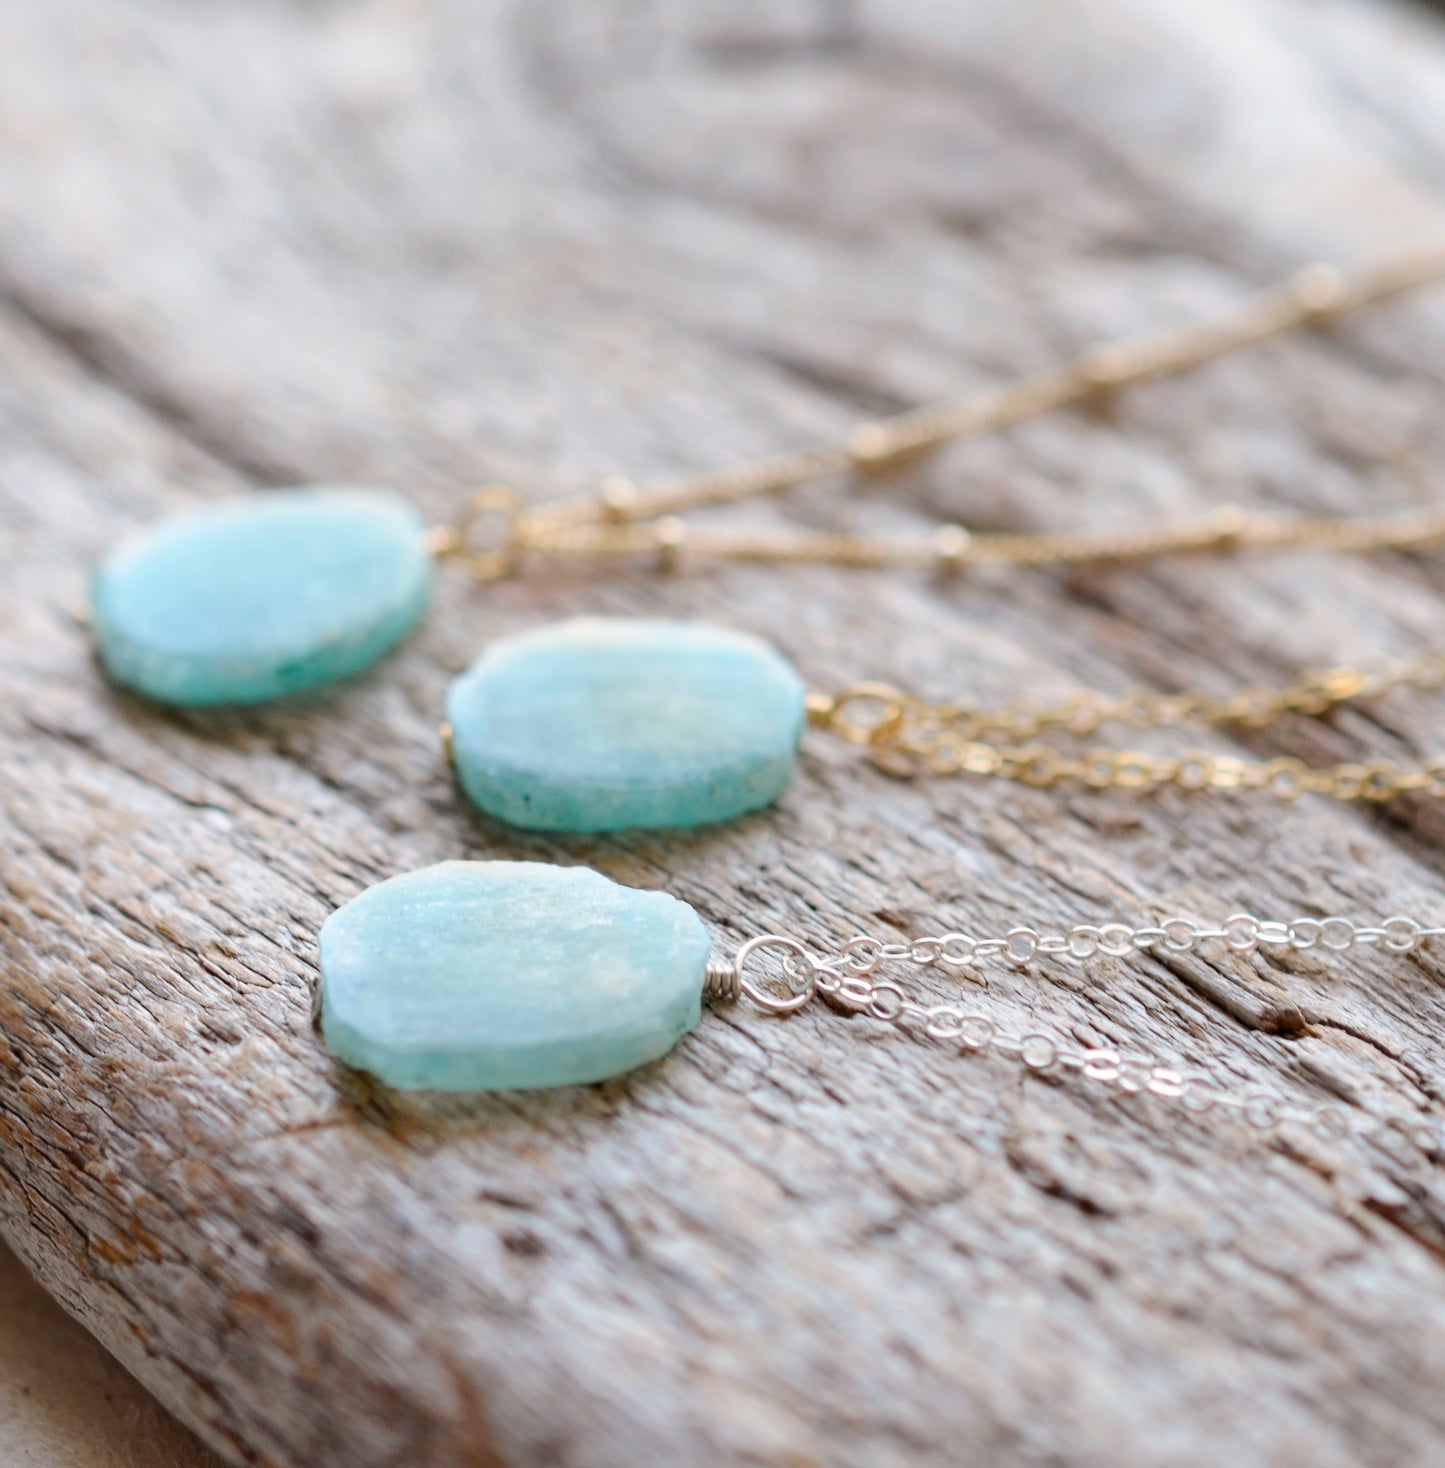 Amazonite Necklace, Raw Natural Amazonite Pendant, Amazonite Jewelry, Blue Gemstone, Sterling Silver or Gold Filled